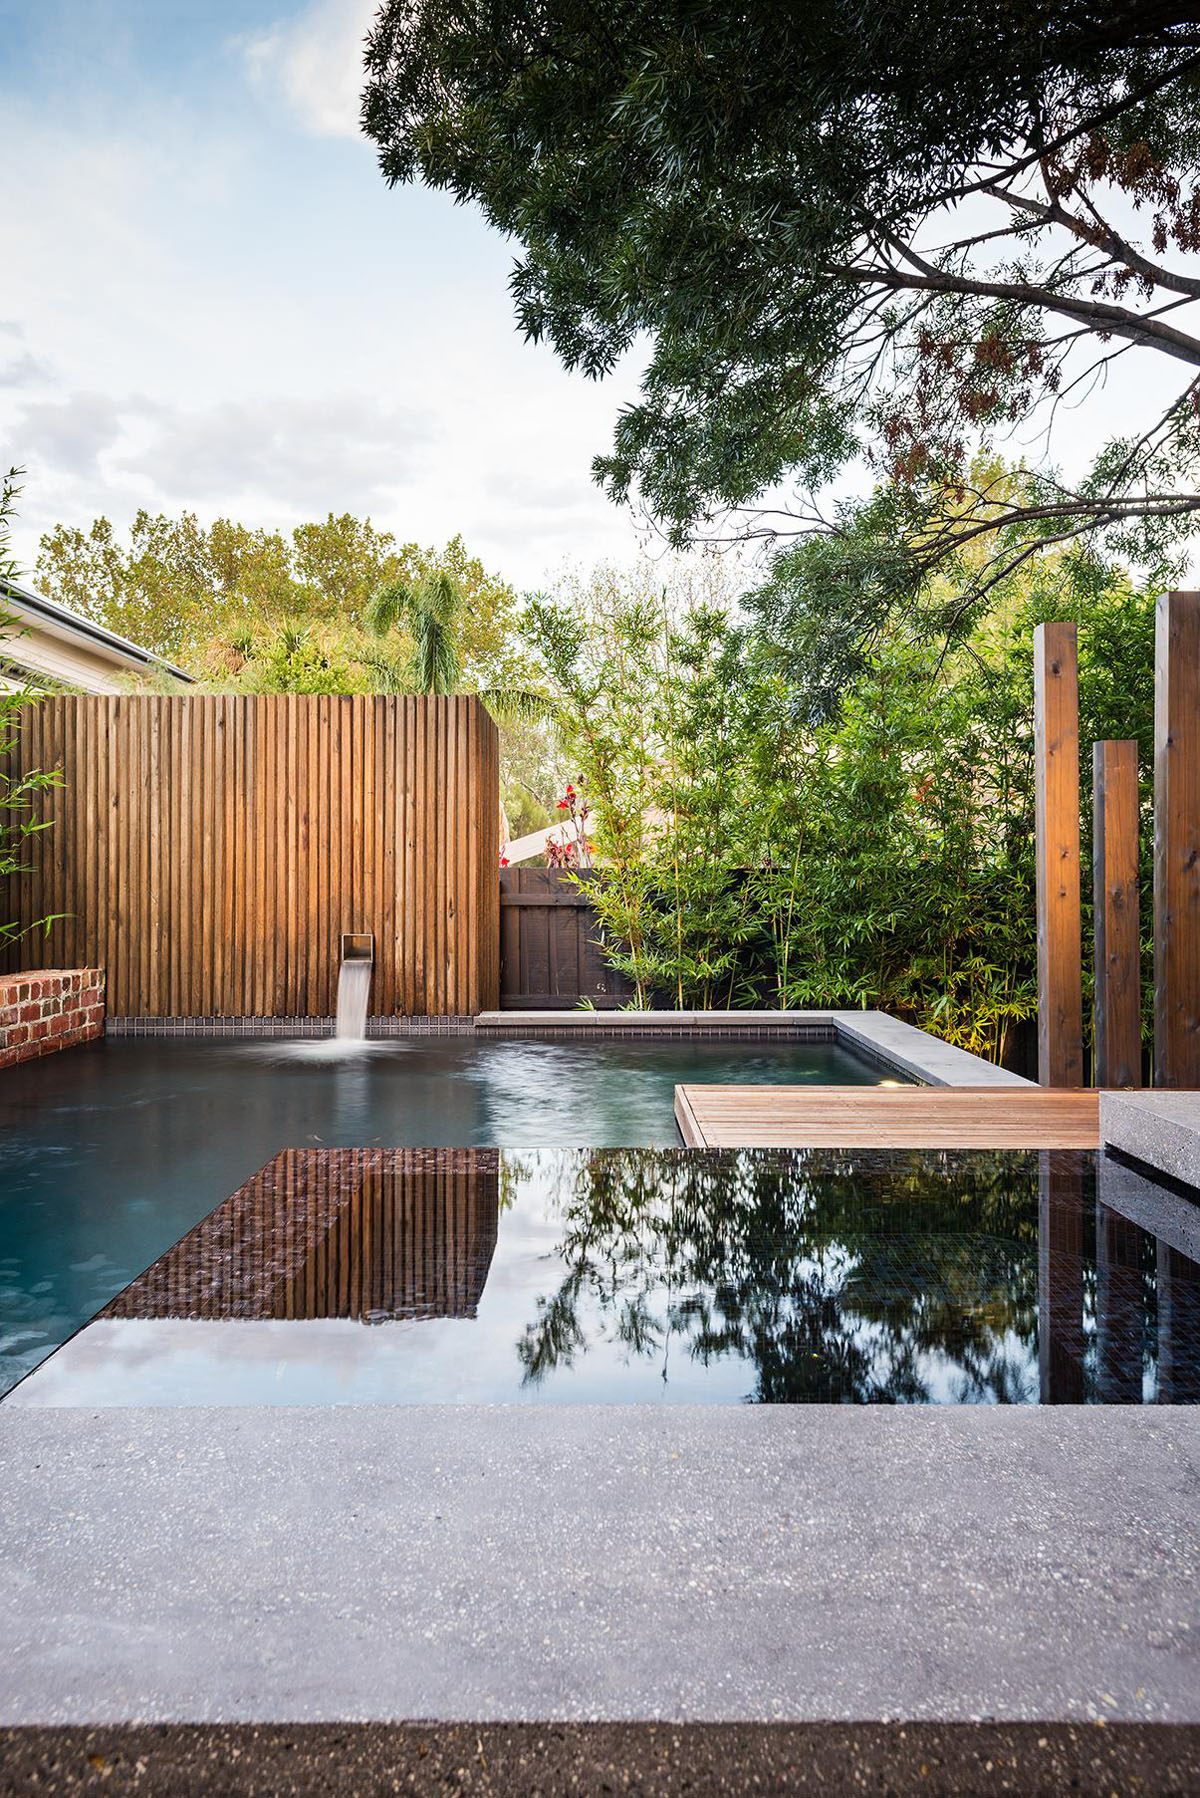 Design Of Backyard Awesome Design Of Maroon Modern Backyard Project With Swimming Pool With Wood Fence And Leafy Tree Decoration Beautiful Modern Backyard Ideas To Relax You At Charming Home